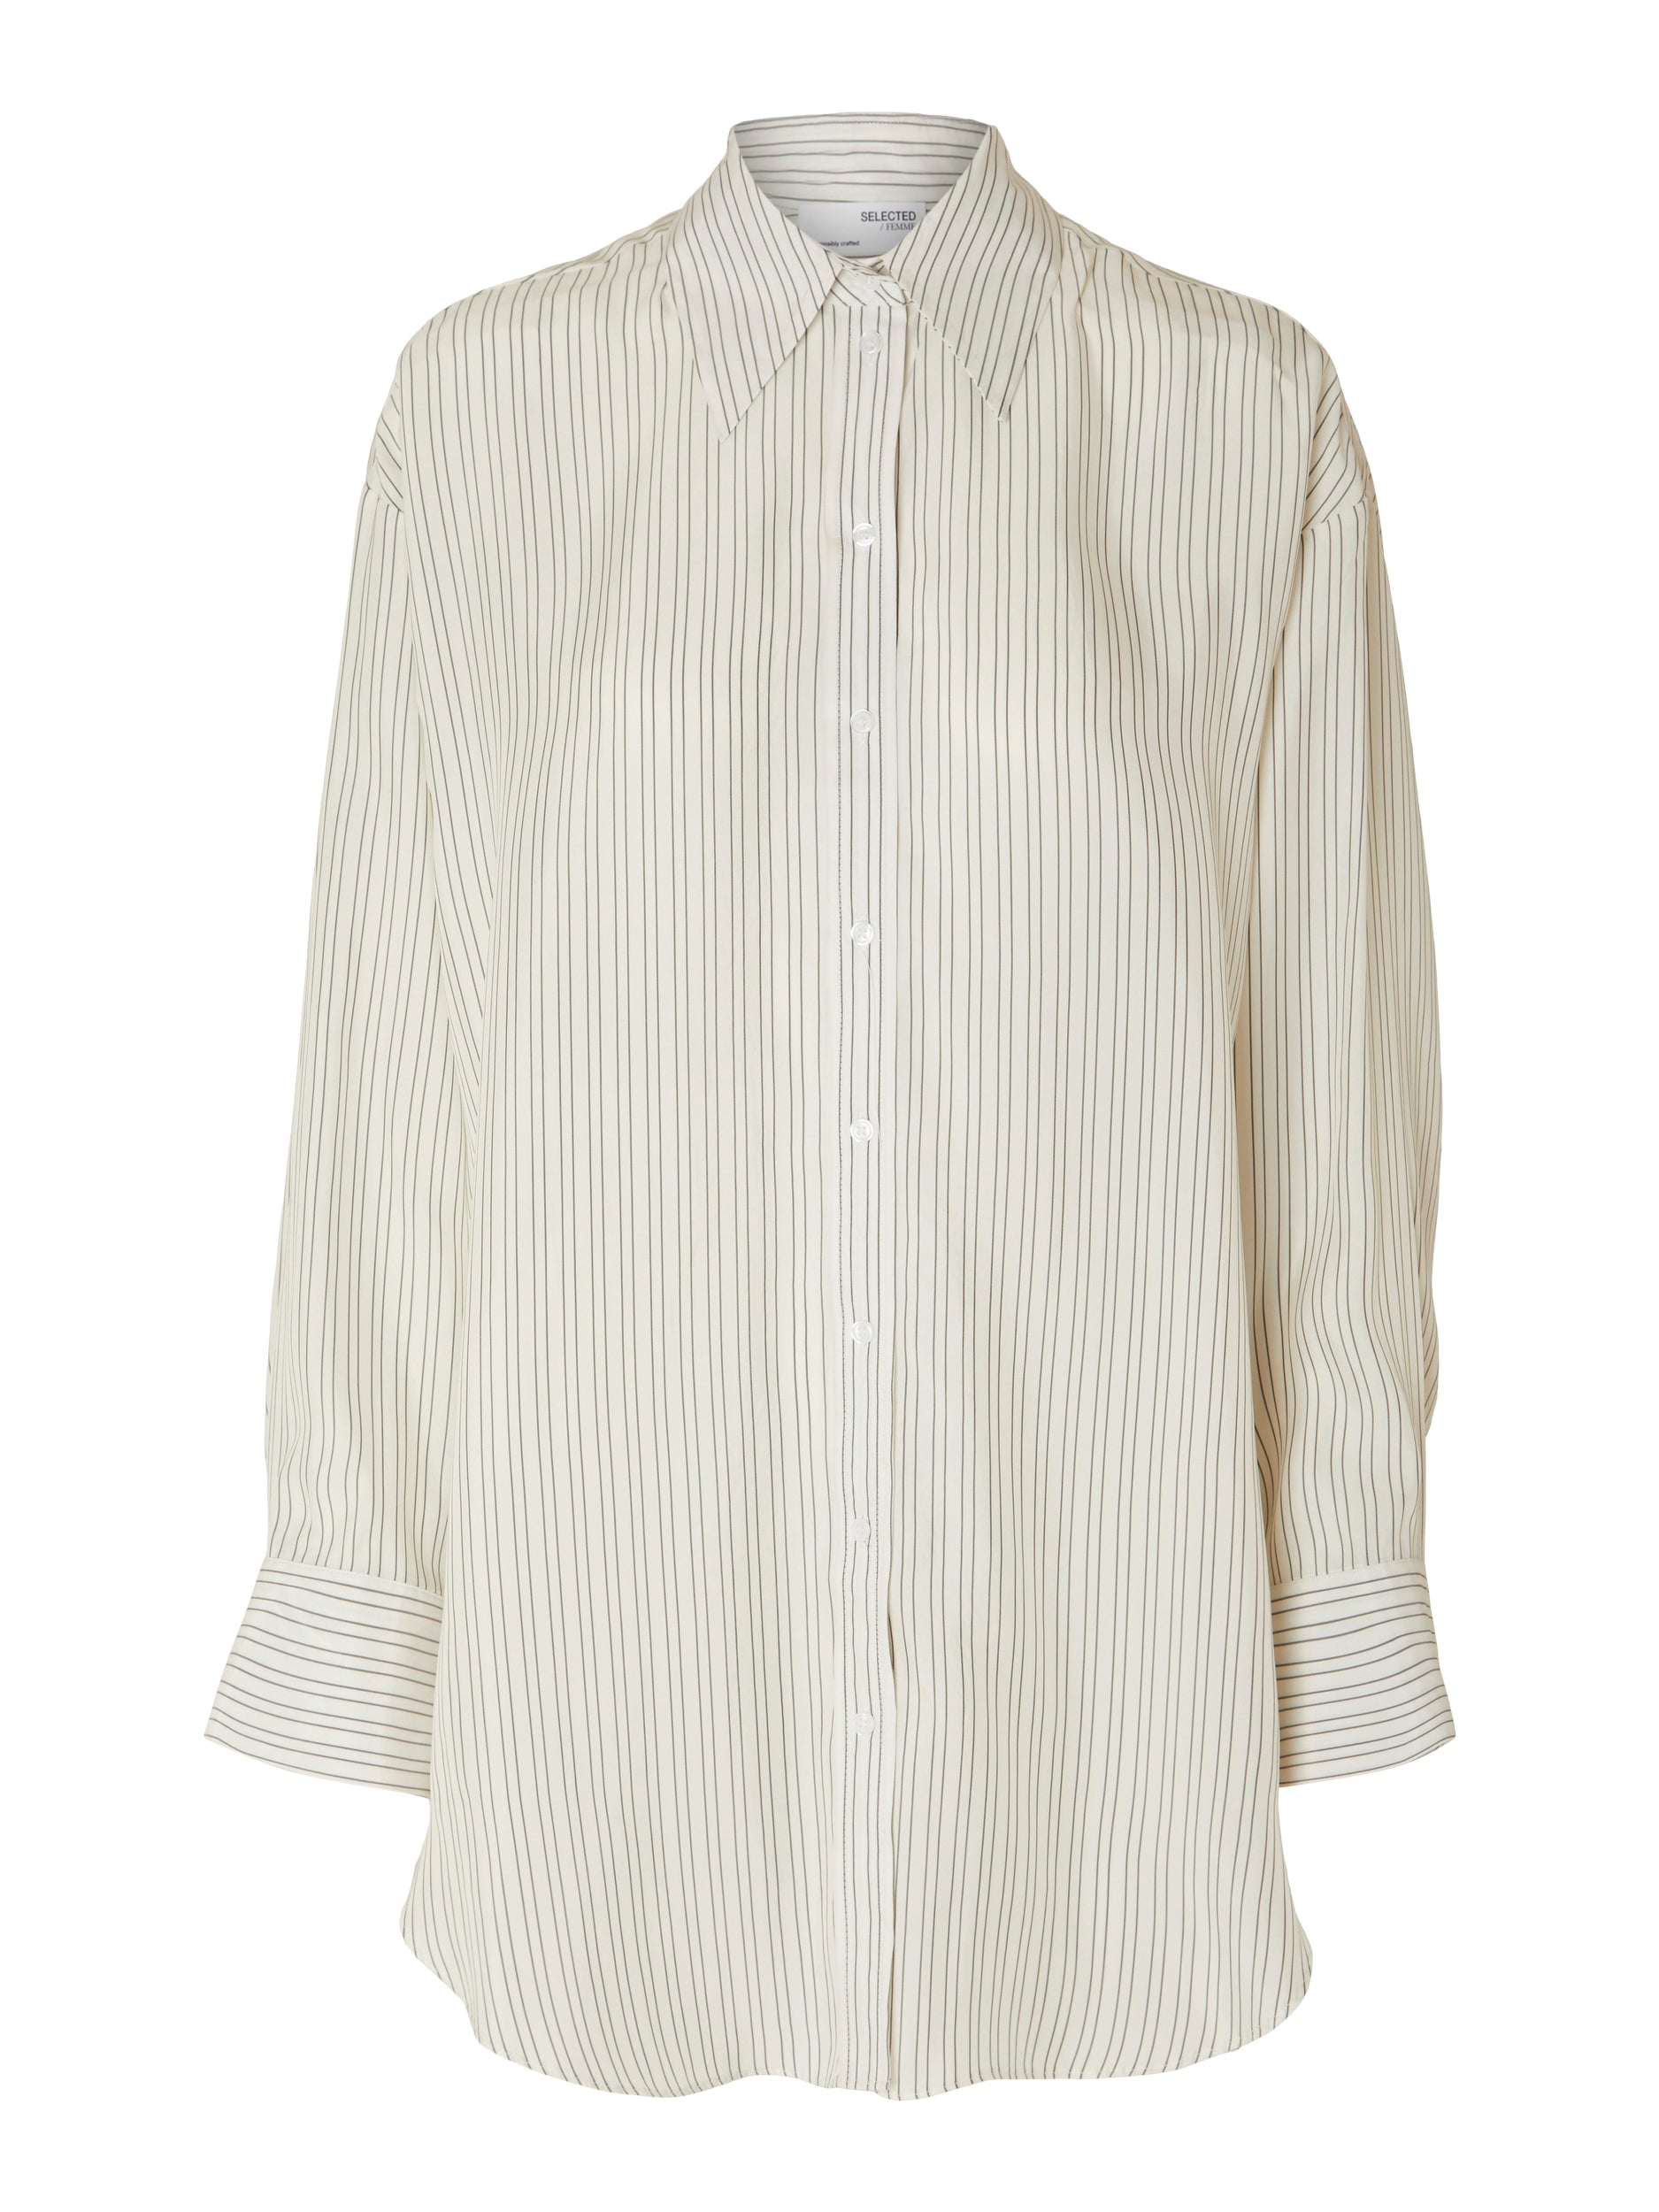 Selected Femme "Theora-Iconic Shirt